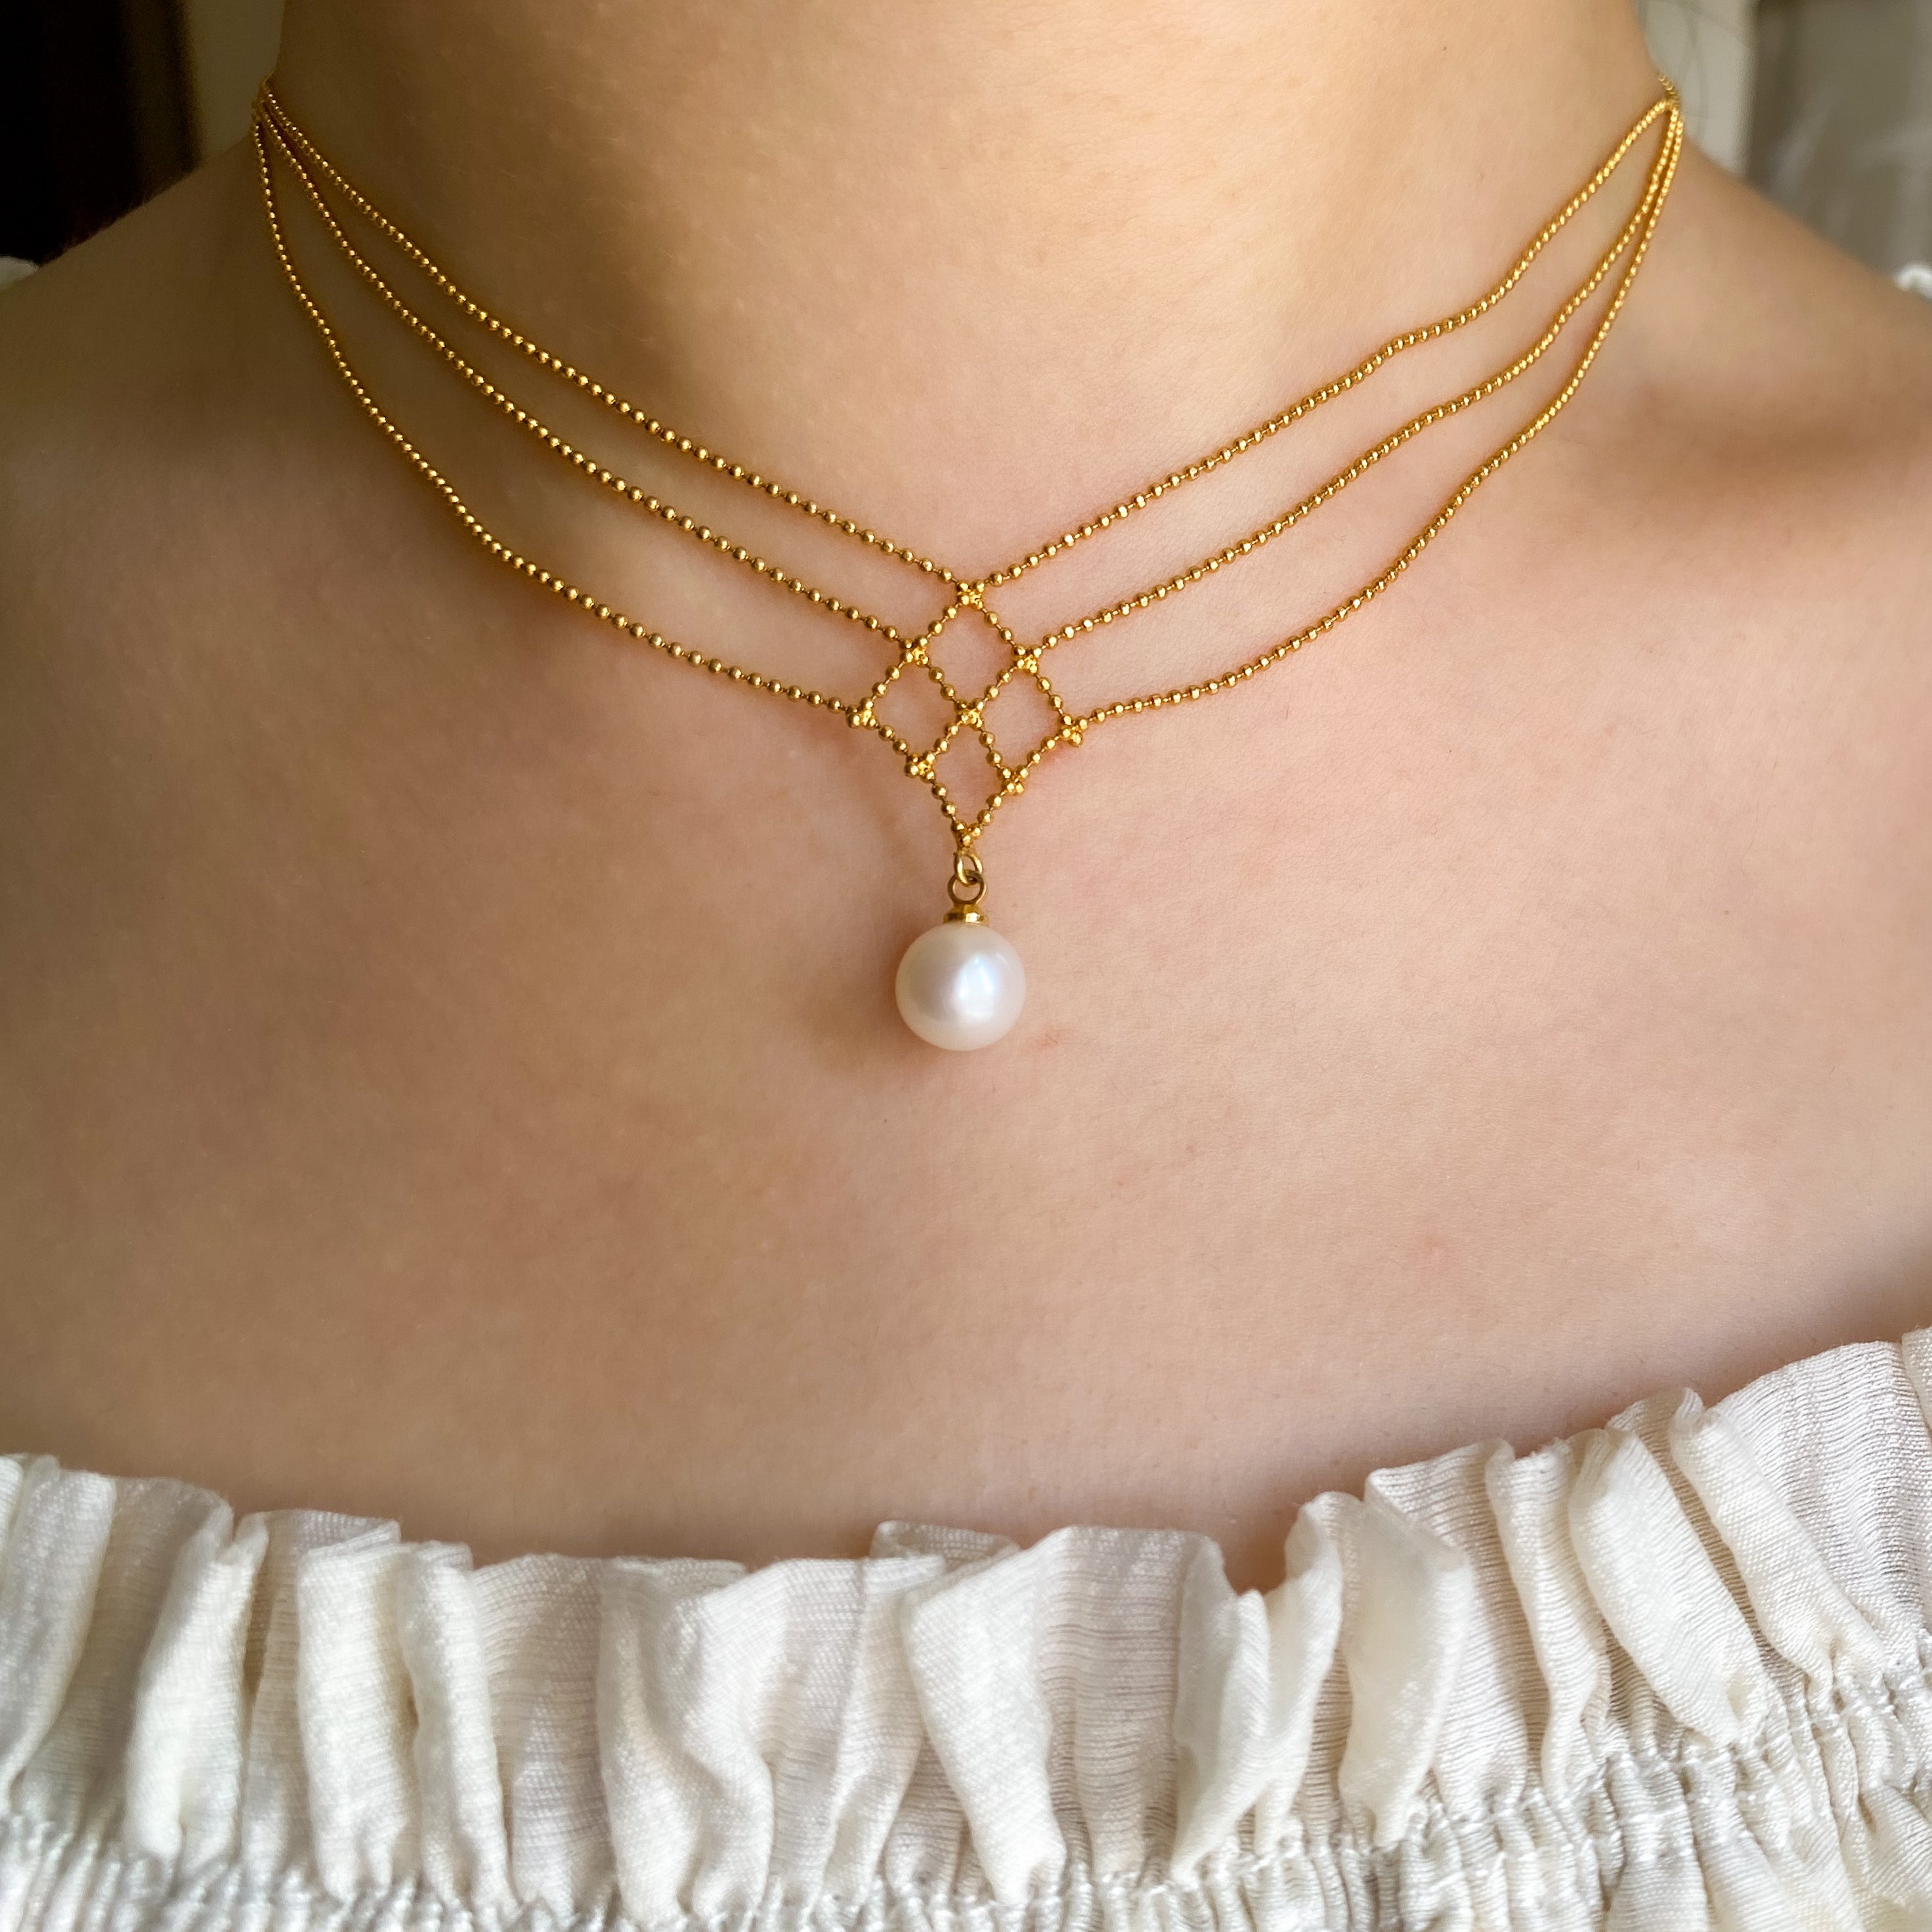 Cordelia - Vintage 14K Gold Plated 3-layer Lace Pearl Collarbone Necklace